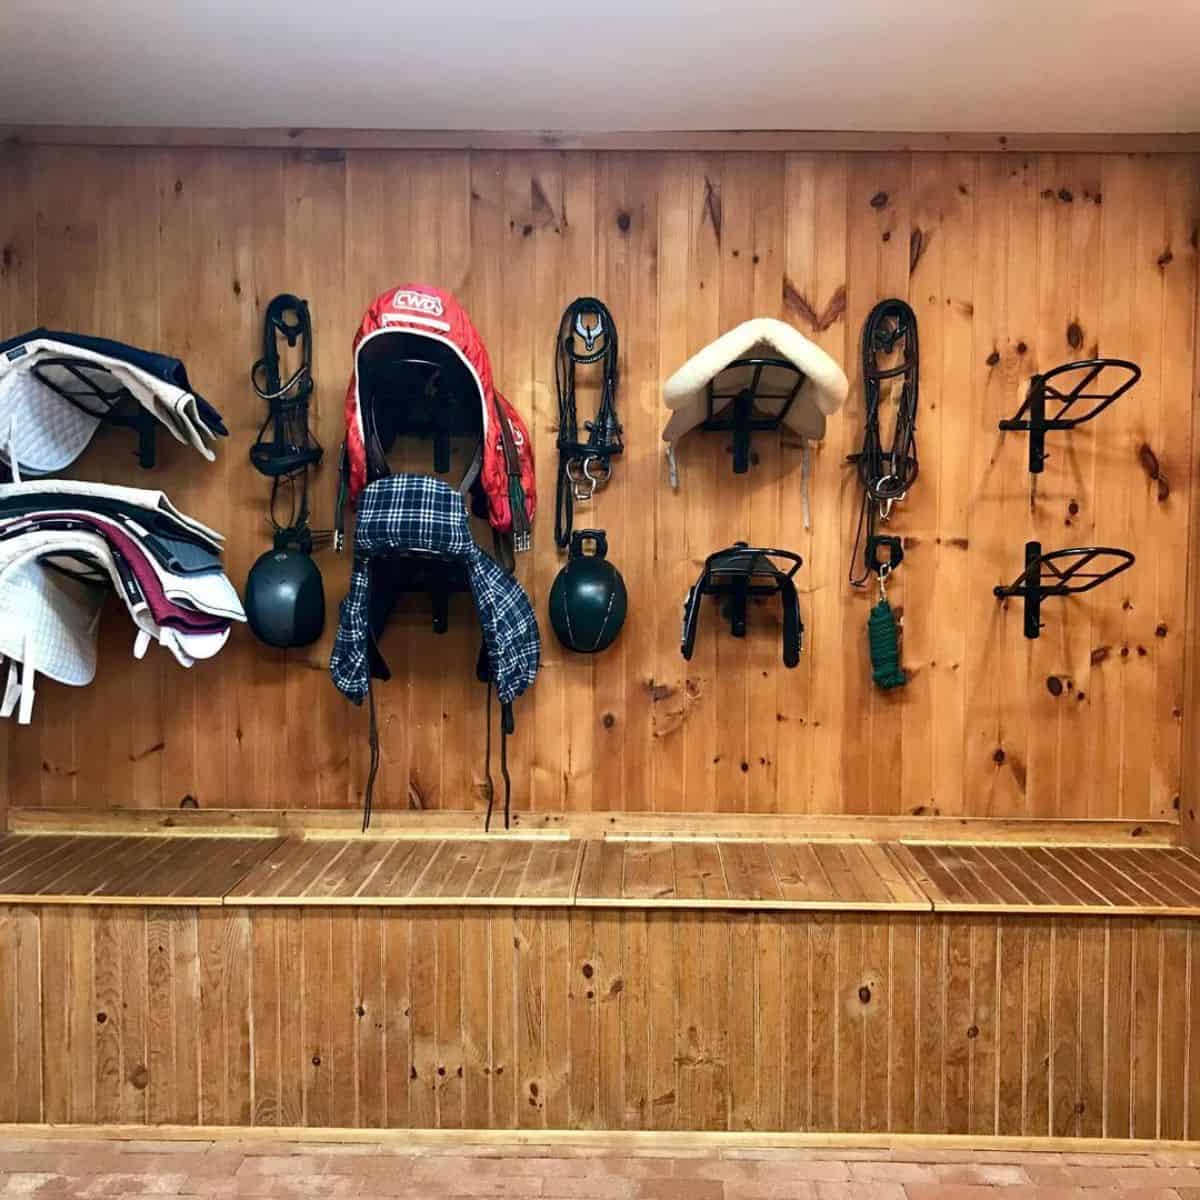 A tack room with halters, helmets, saddles, and bridles hangs on a wooden wall.